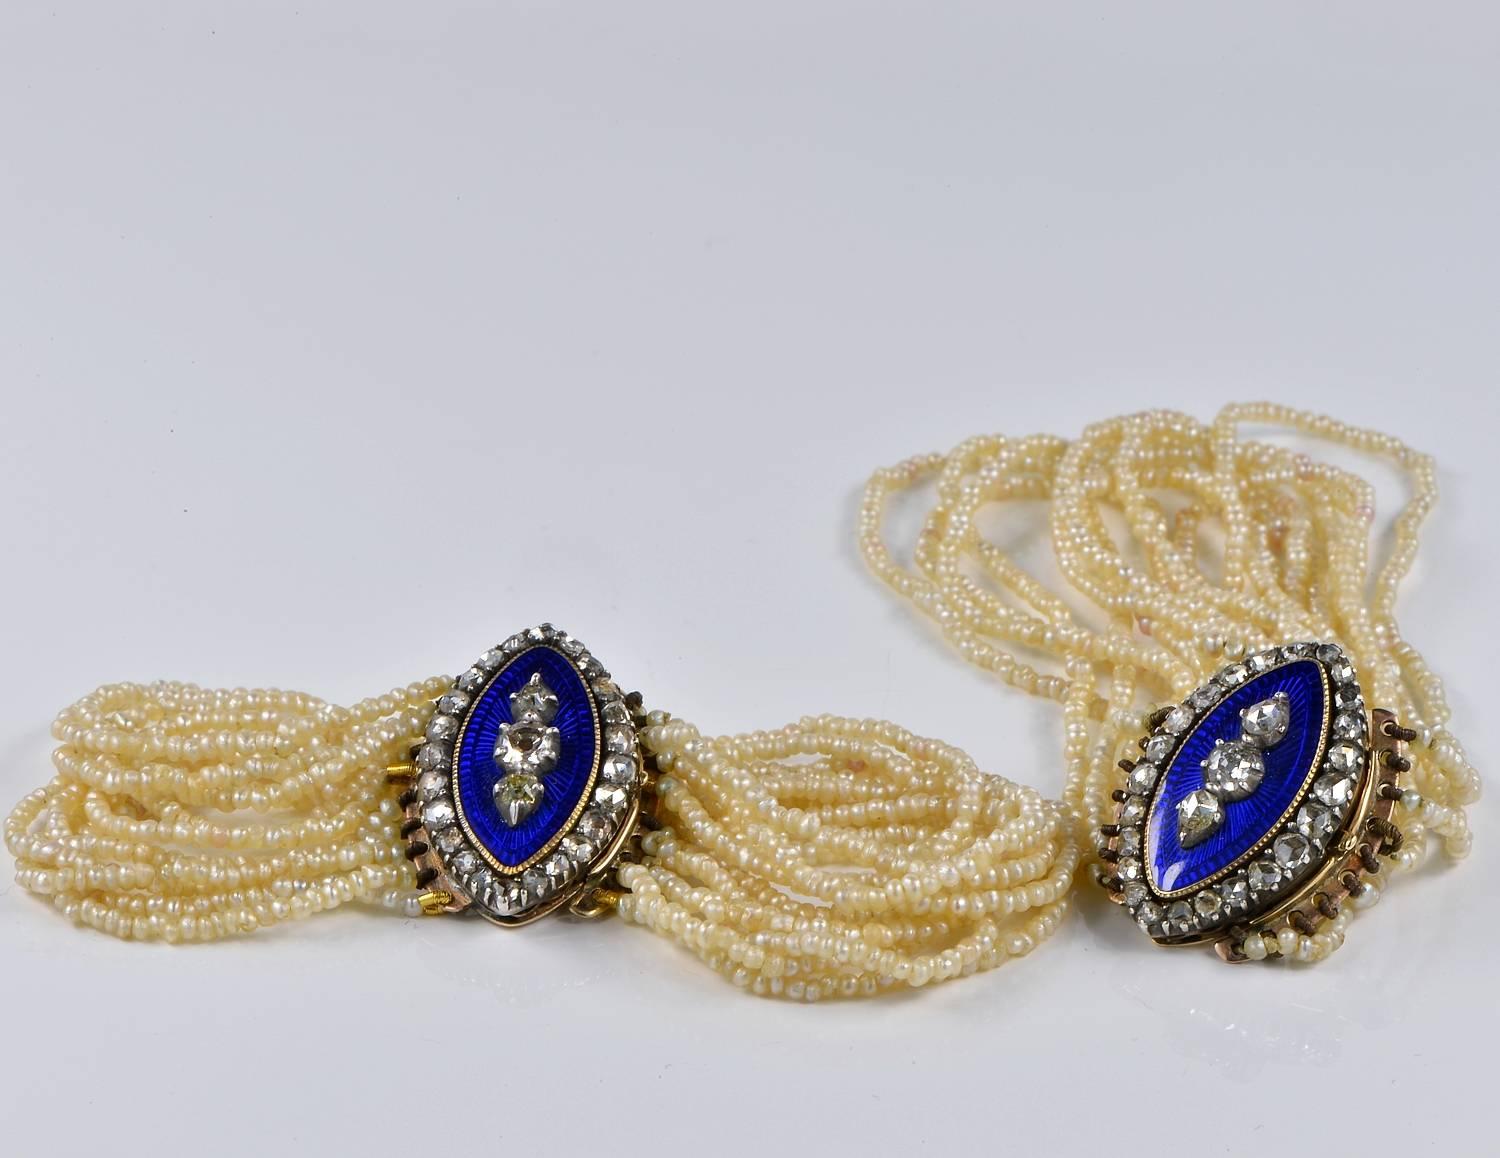 Rare Georgian period pair of bracelets can be turned in stunning choker too
1790/1800 ca.
Made of 16 KT solid gold with silver housing the Diamonds - not marked

Timeless, sensual combination of natural micro pearls in multi strands, Diamonds and